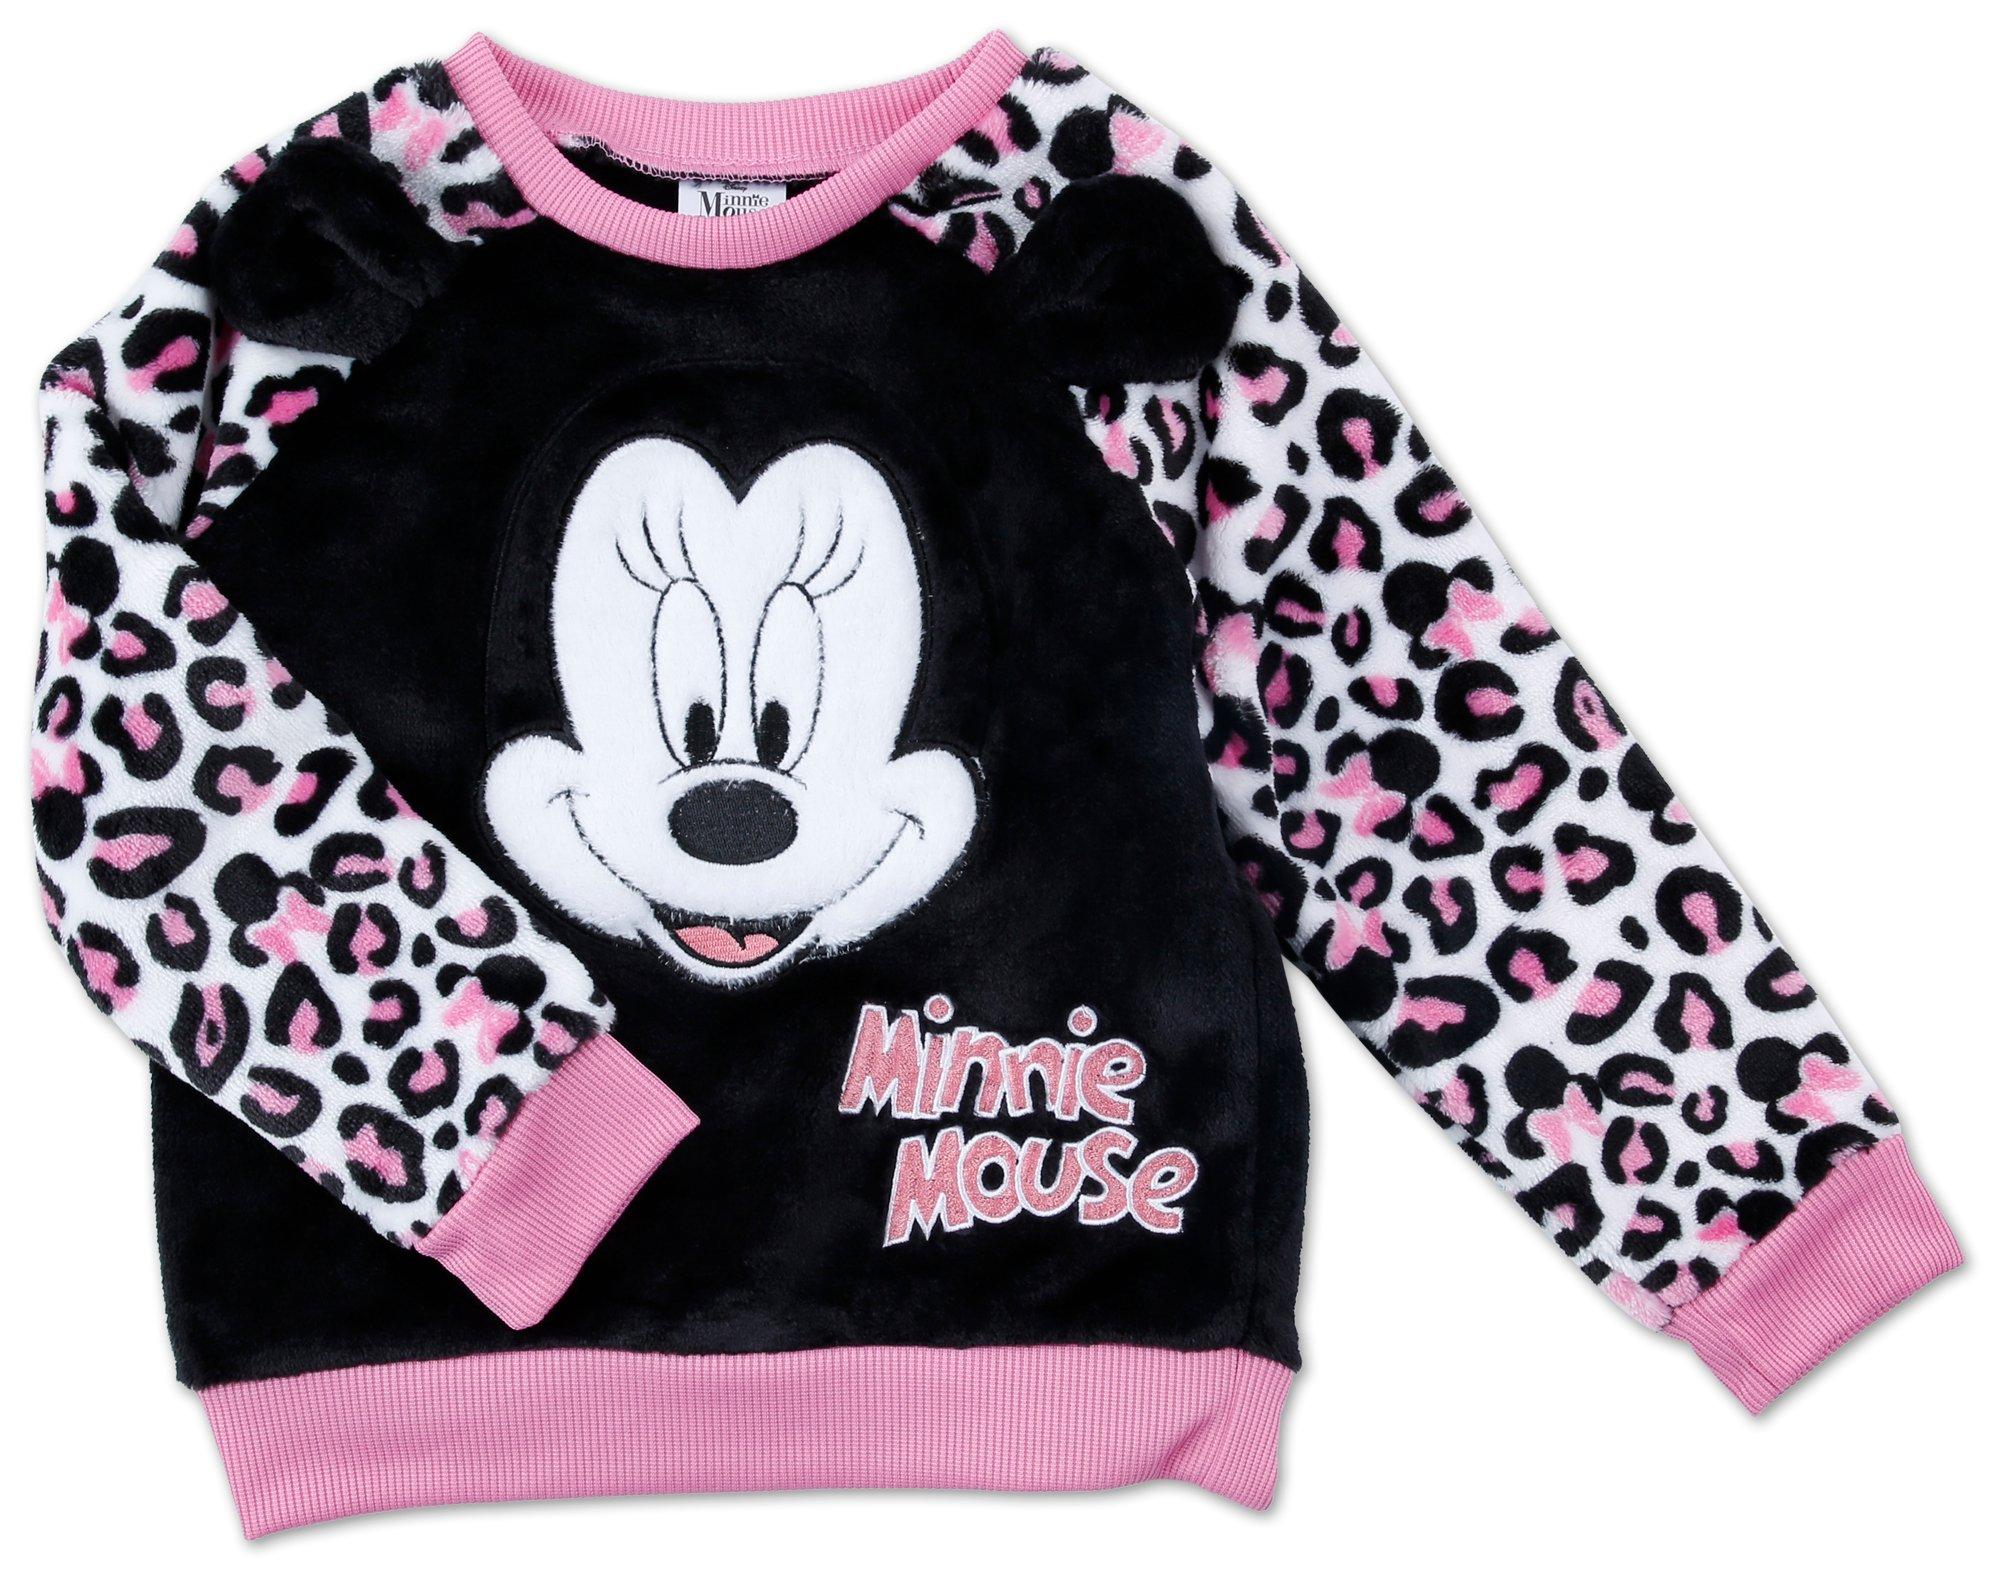 Little Girls Minnie Mouse Top